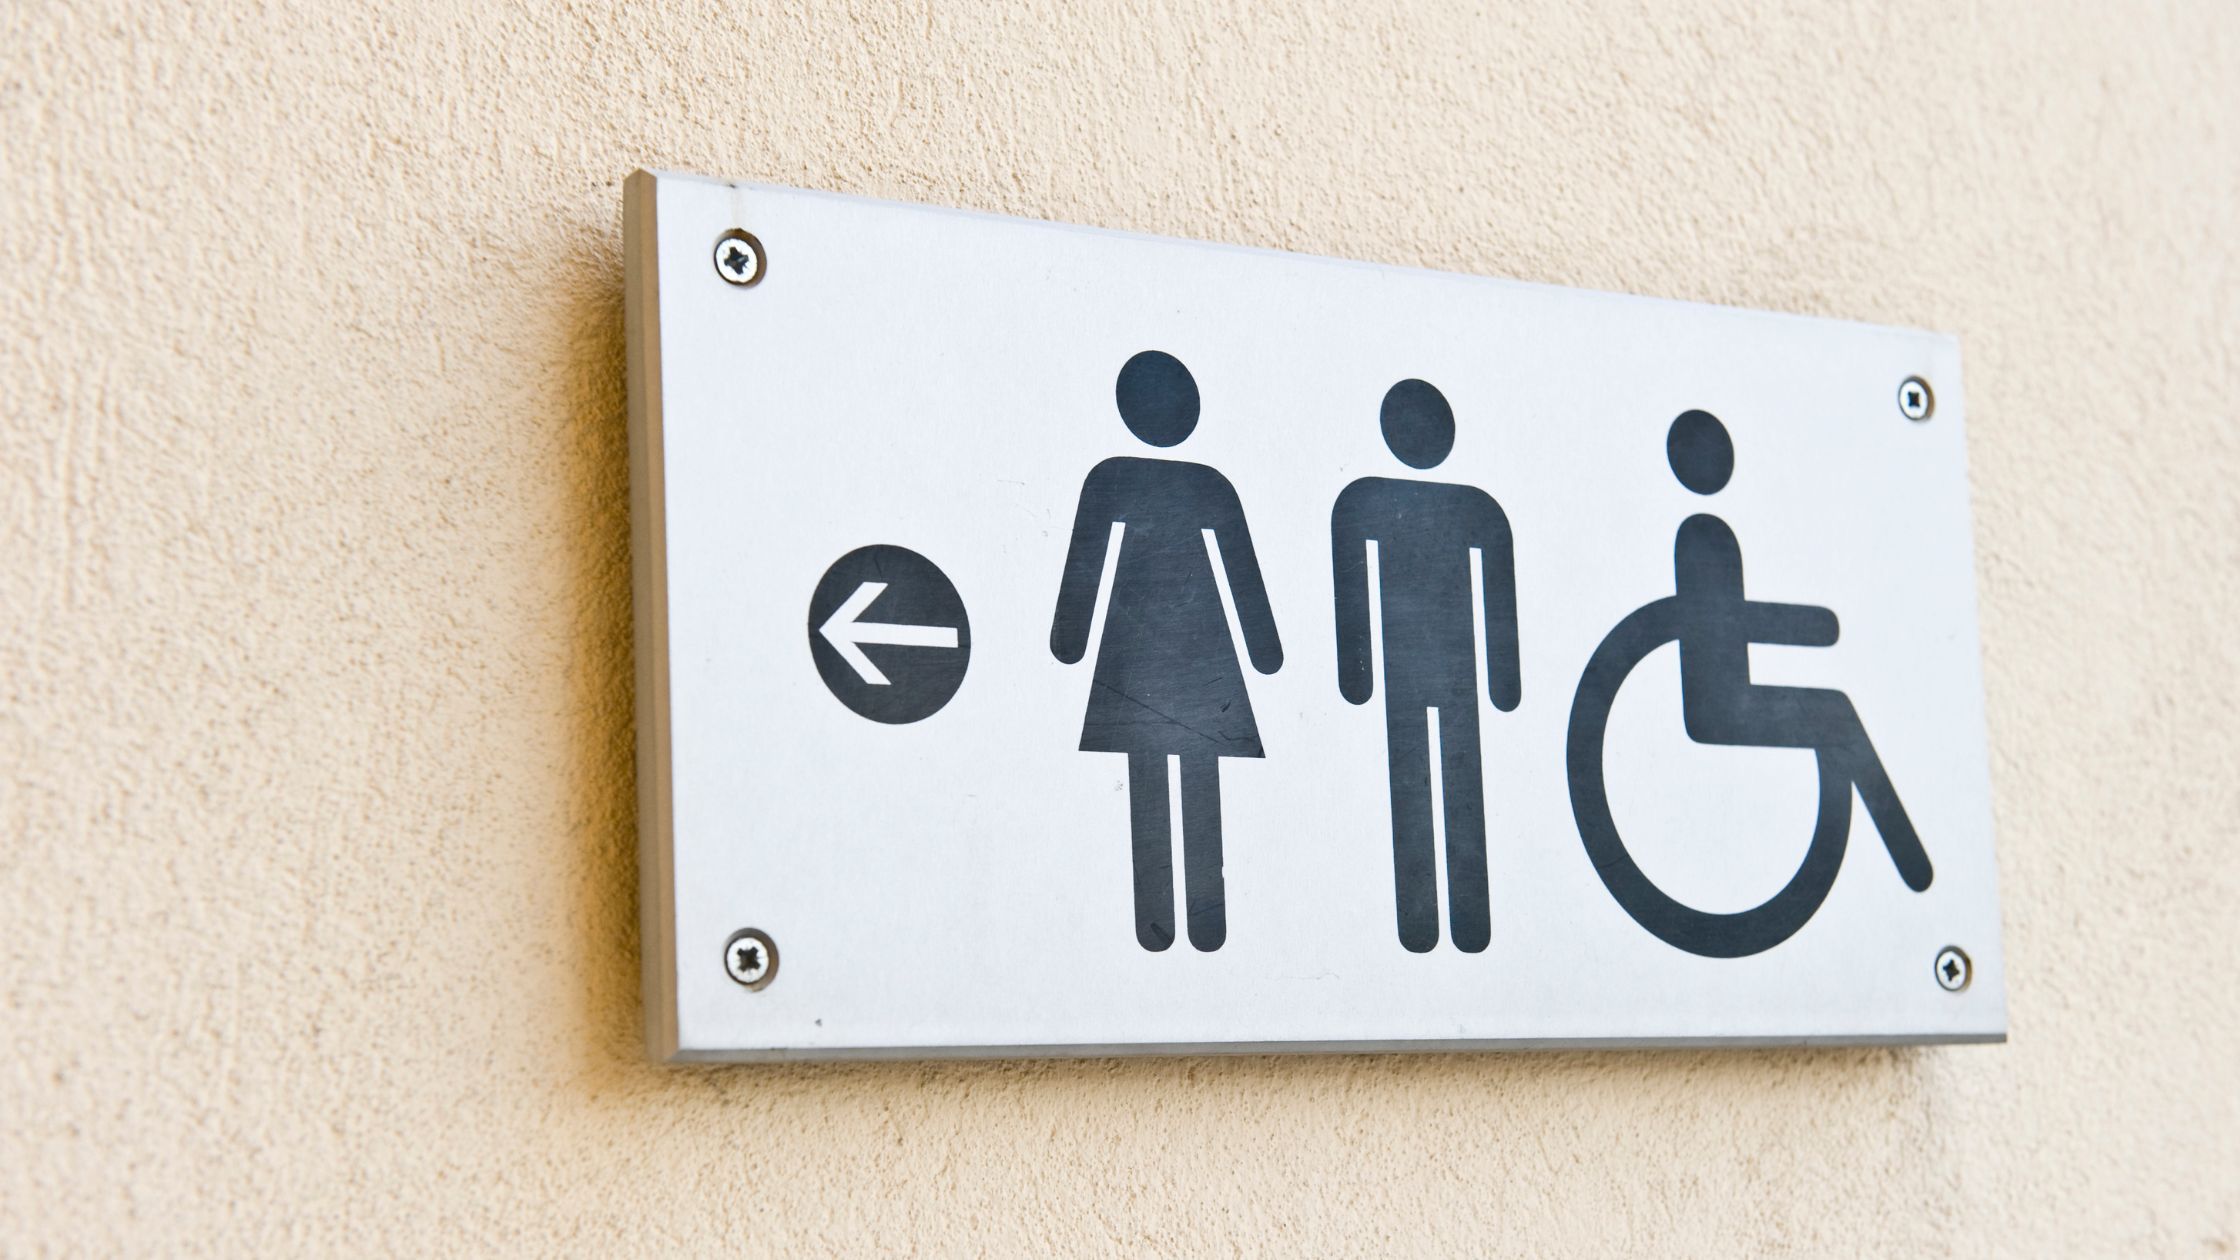 Urinary incontinence - Potential causes and when this could have been avoided